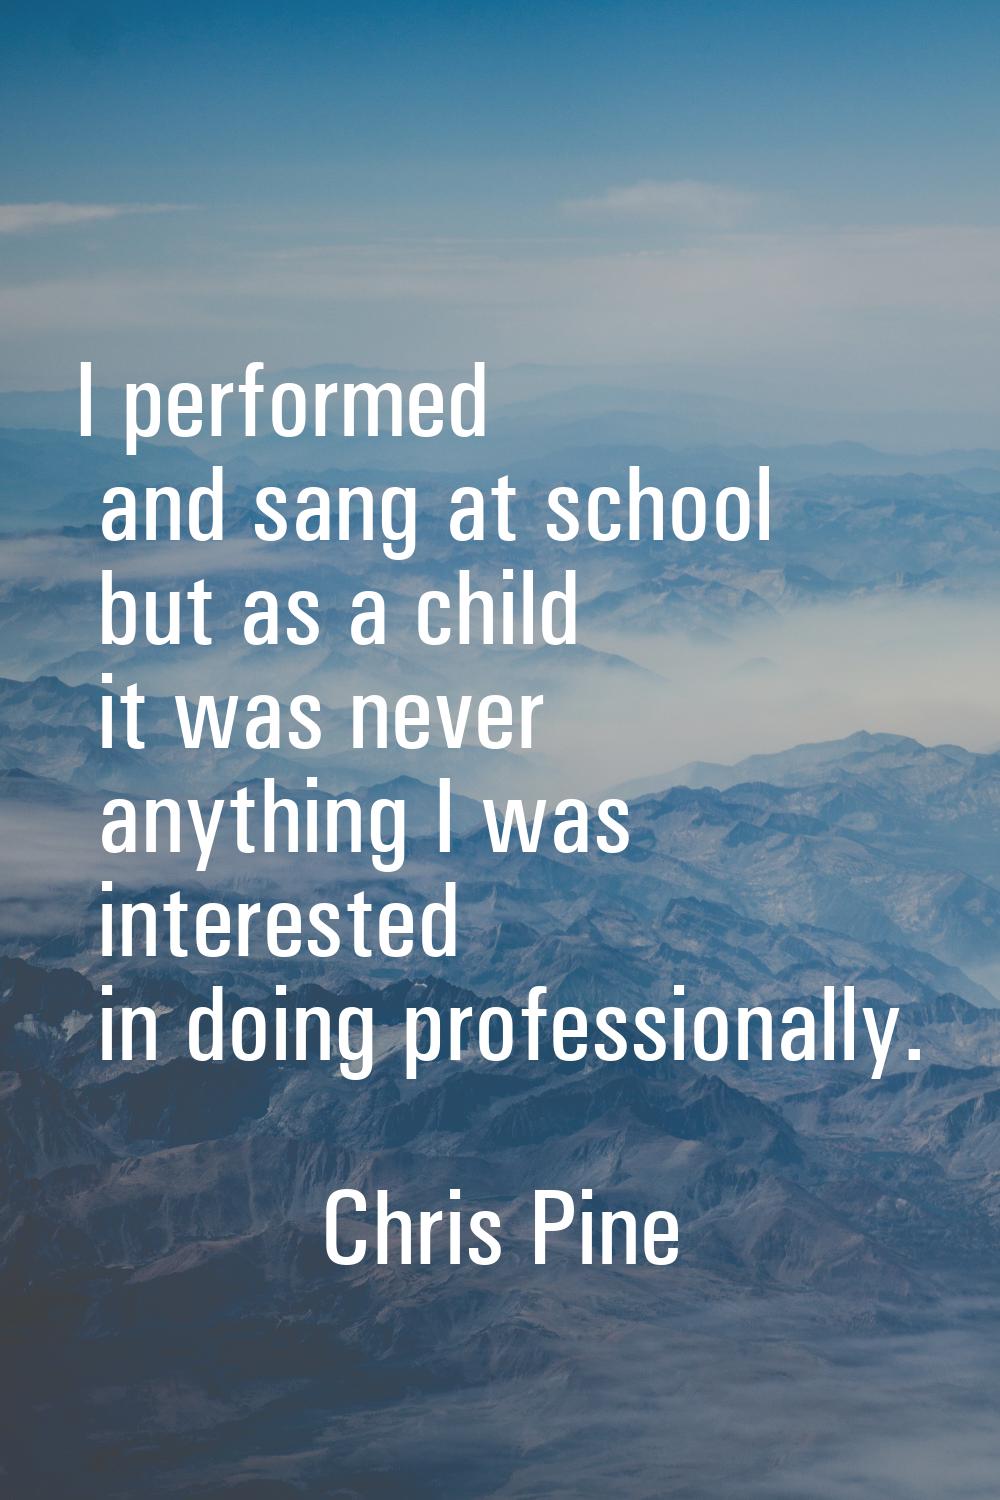 I performed and sang at school but as a child it was never anything I was interested in doing profe